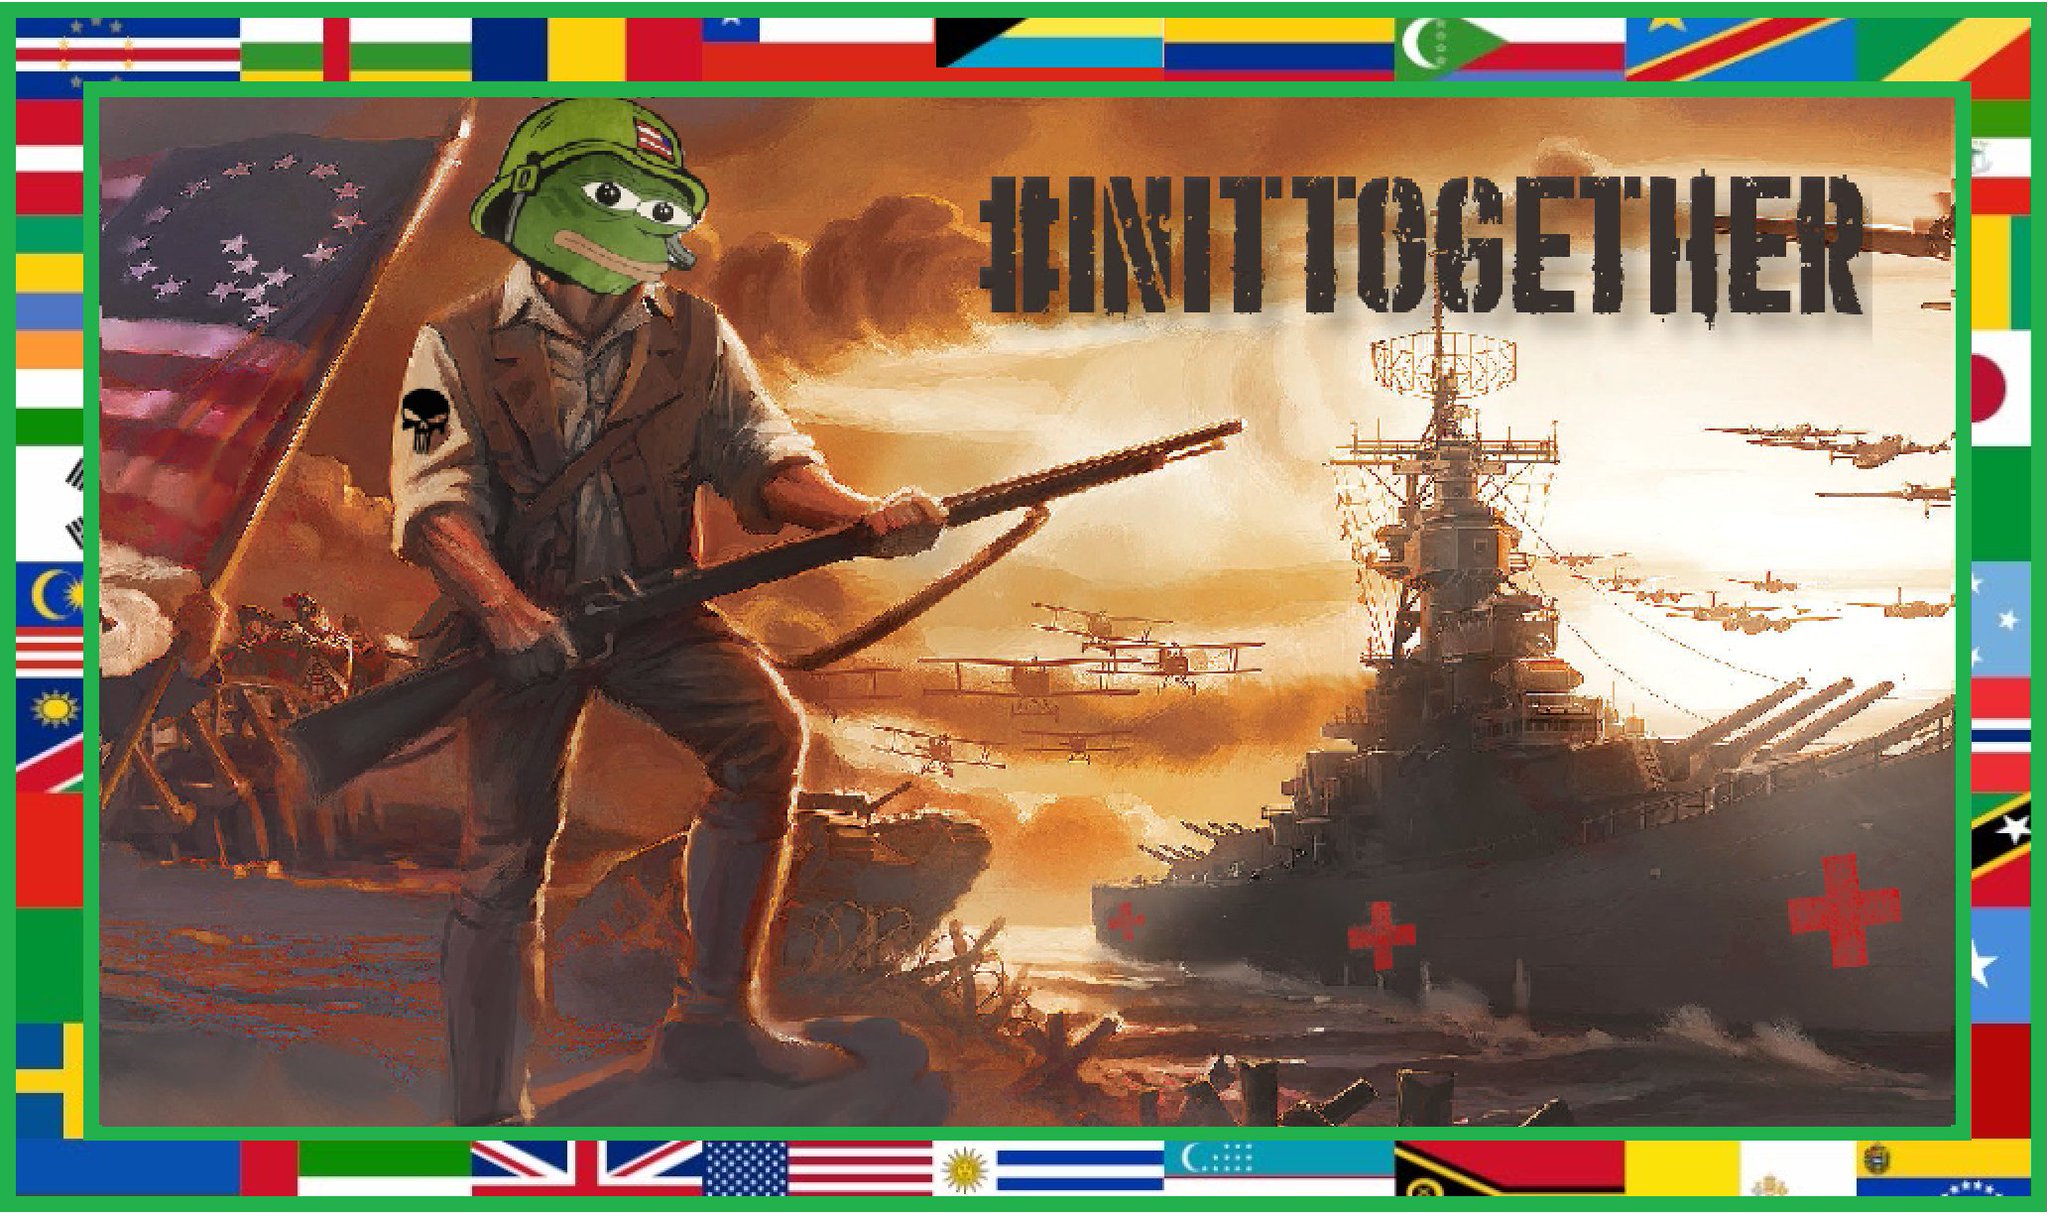 ENoCH on Twitter: "OPERATION #InItTogether (#WWG1WGA) ROUND 5WORLDWIDE WAVE EVENT:   On Friday April 24th at17:17 military time in YOUR TIMEZONEPlease join in by making a social media post including this meme and the above hashtags.Share a message around the world showing solidarity.… https://t.co/4jvmk3lPq3"